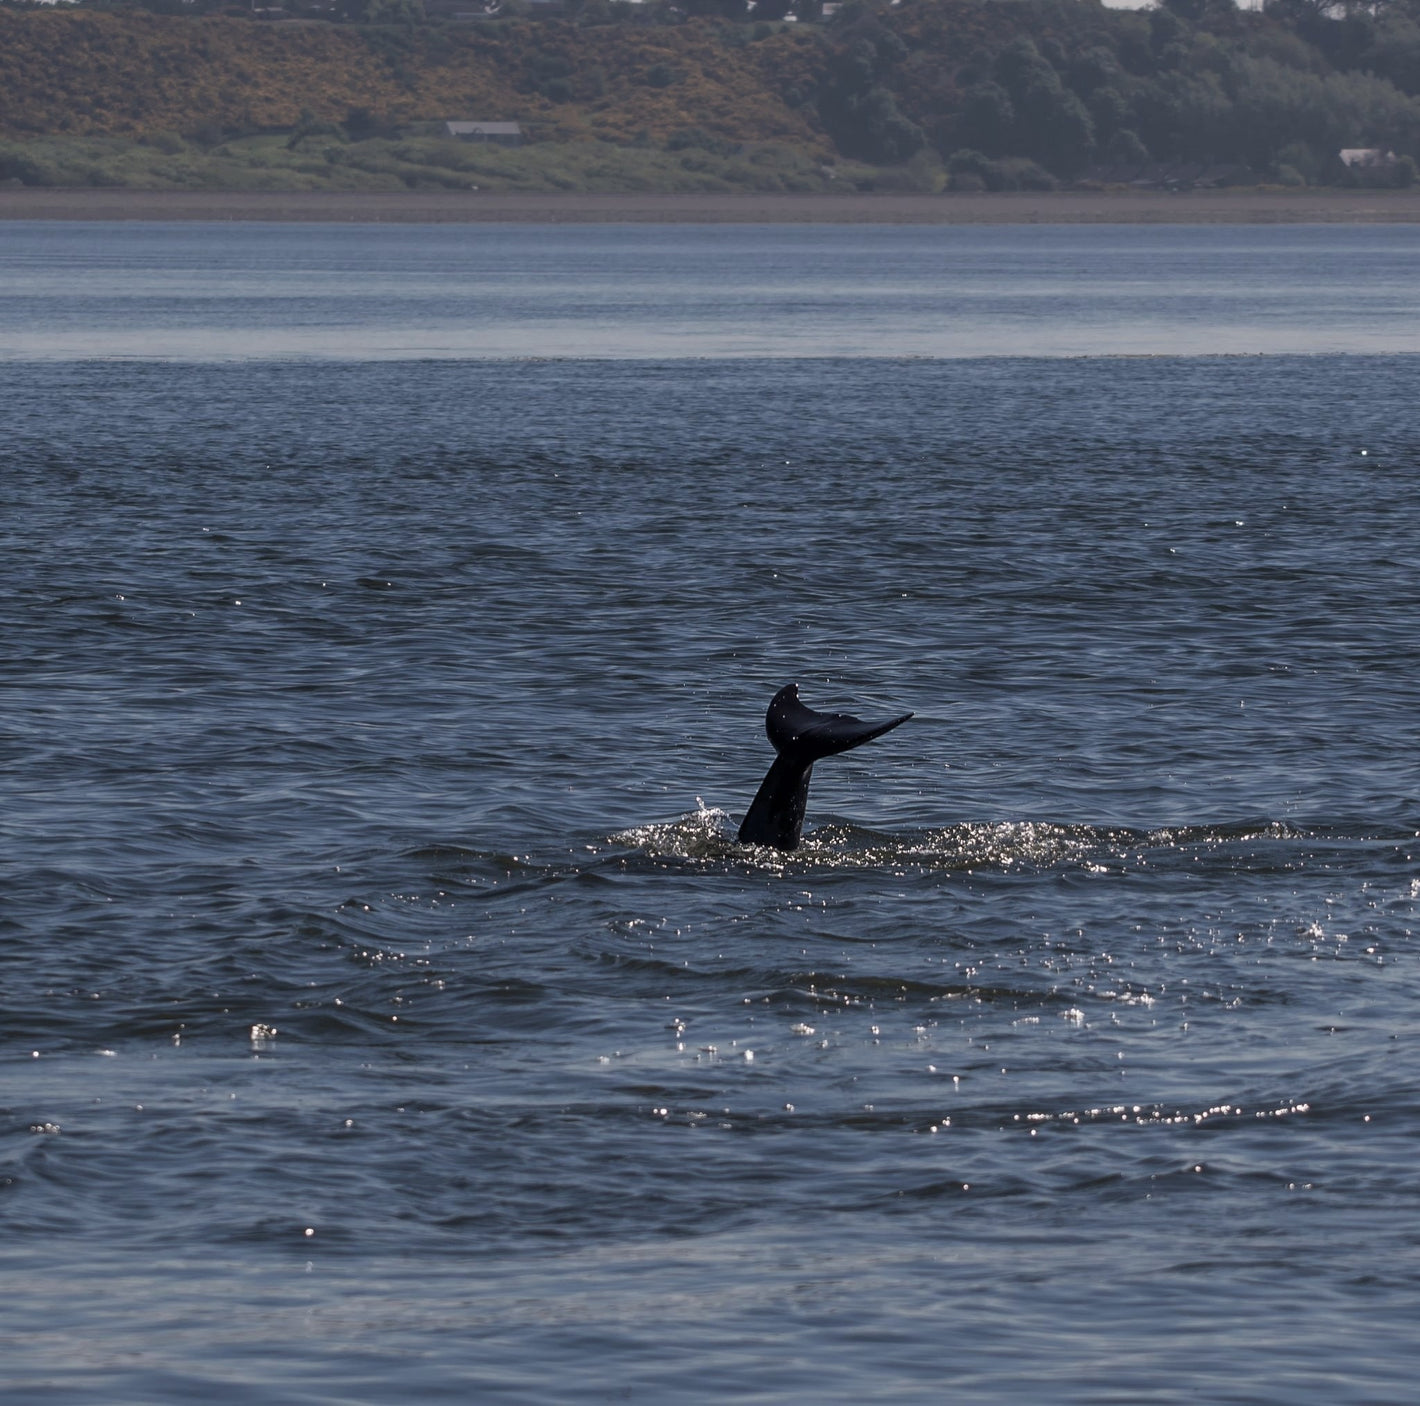 The Hebridean whale and dolphin trust 